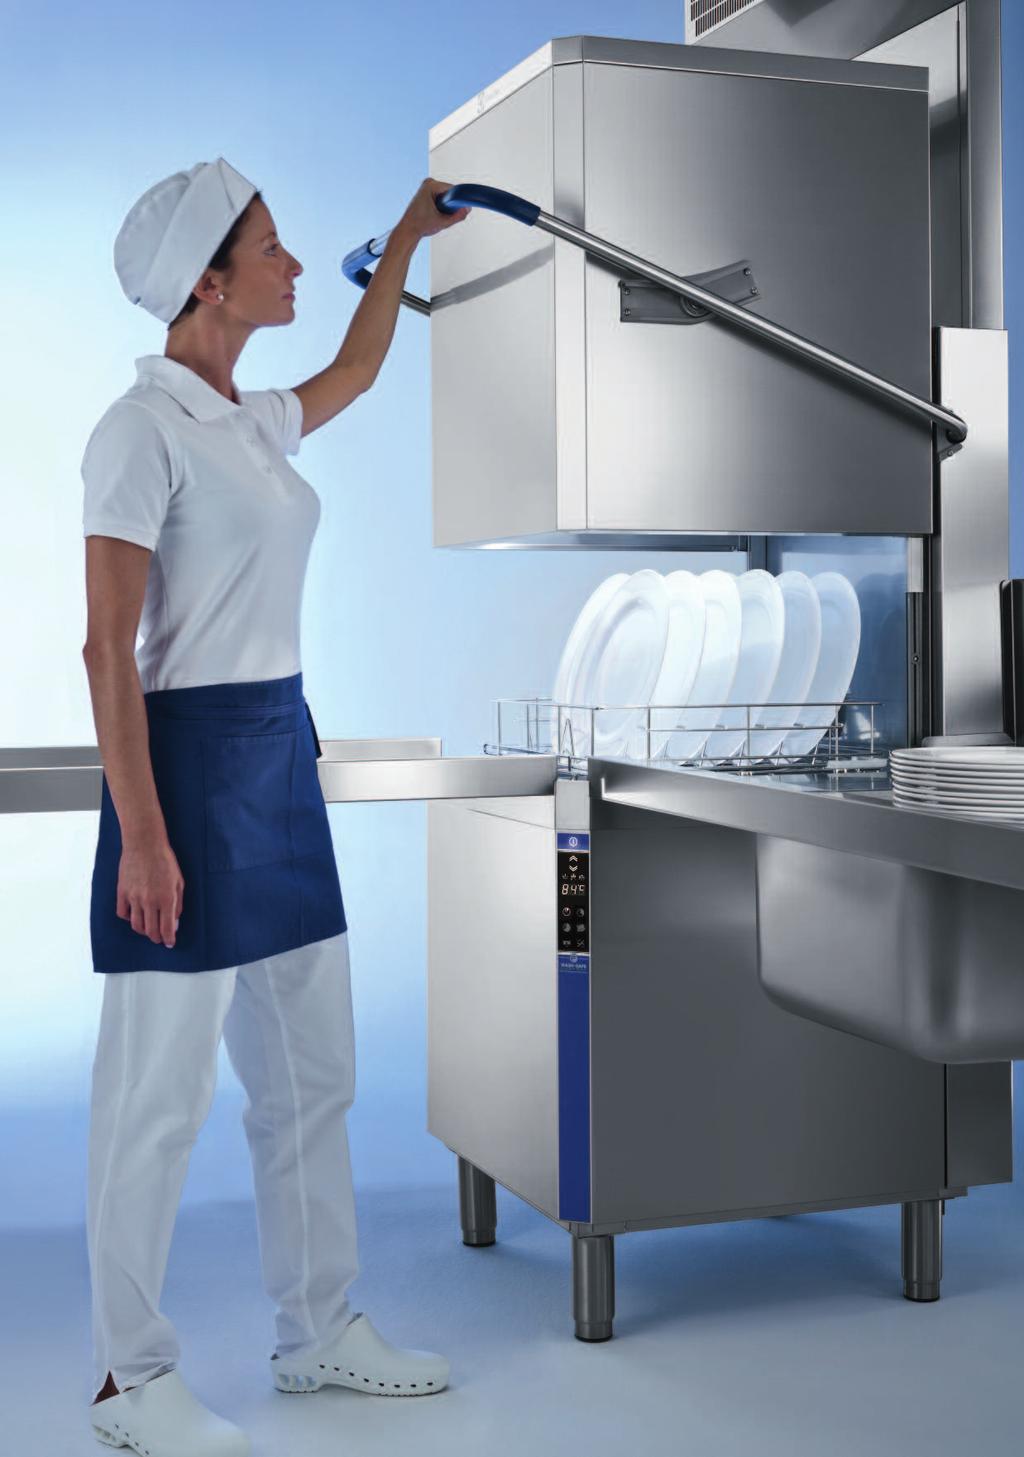 The new Electrolux hood type dishwasher uses just 2 litres of fresh rinse water yet boasts the highest throughput in its class 1134 dishes an hour.